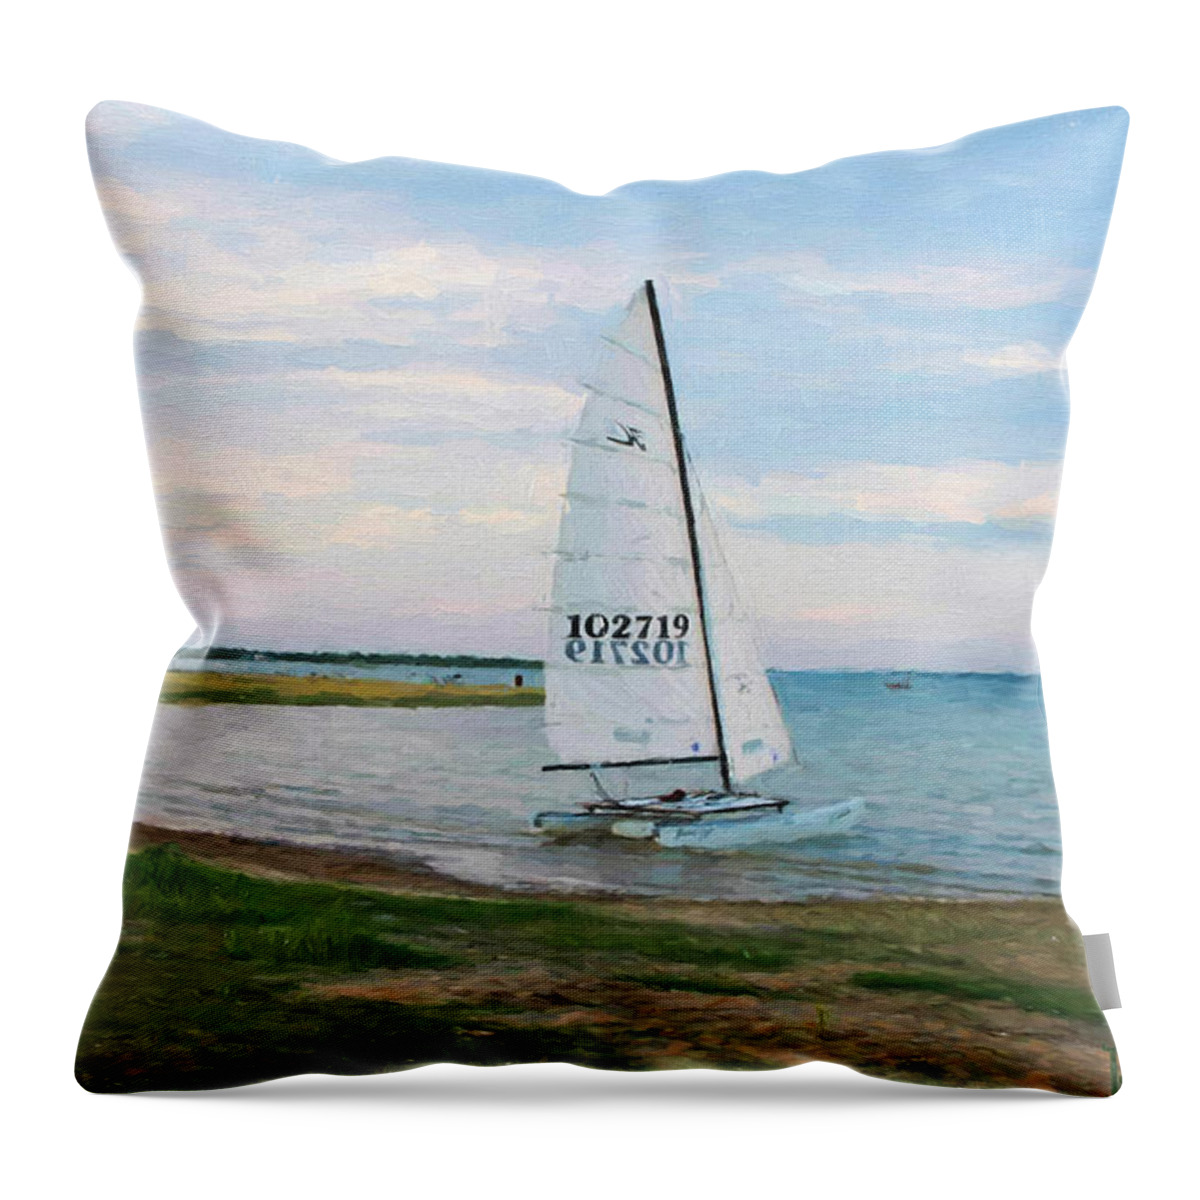 Hobie Cat Throw Pillow featuring the painting Carolina Shore by Phil Price